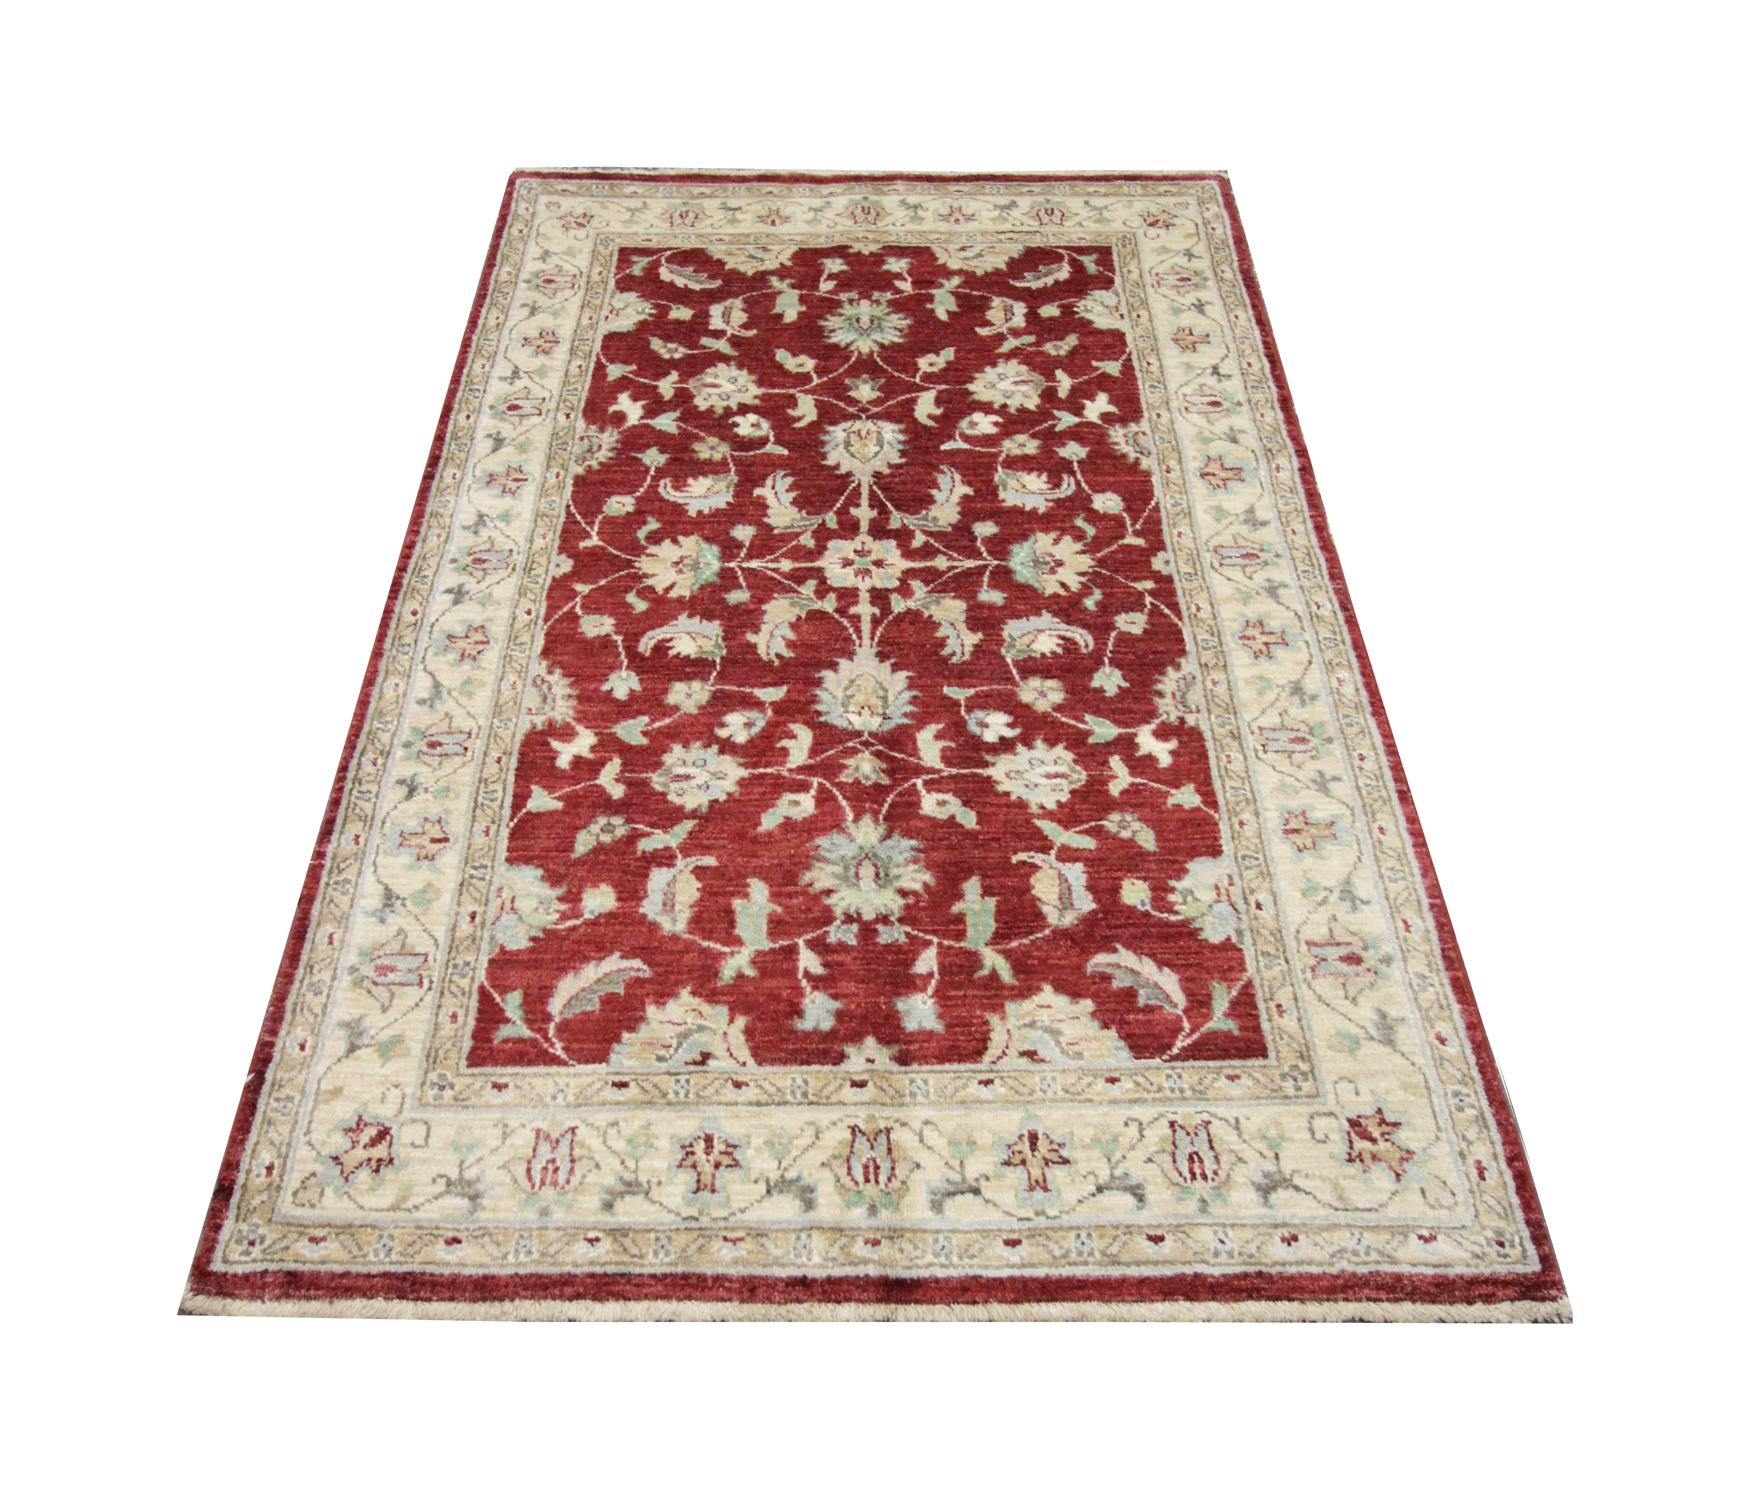 Tribal Traditional Carpet Rug Handwoven Floral Wool Red Area Rug For Sale